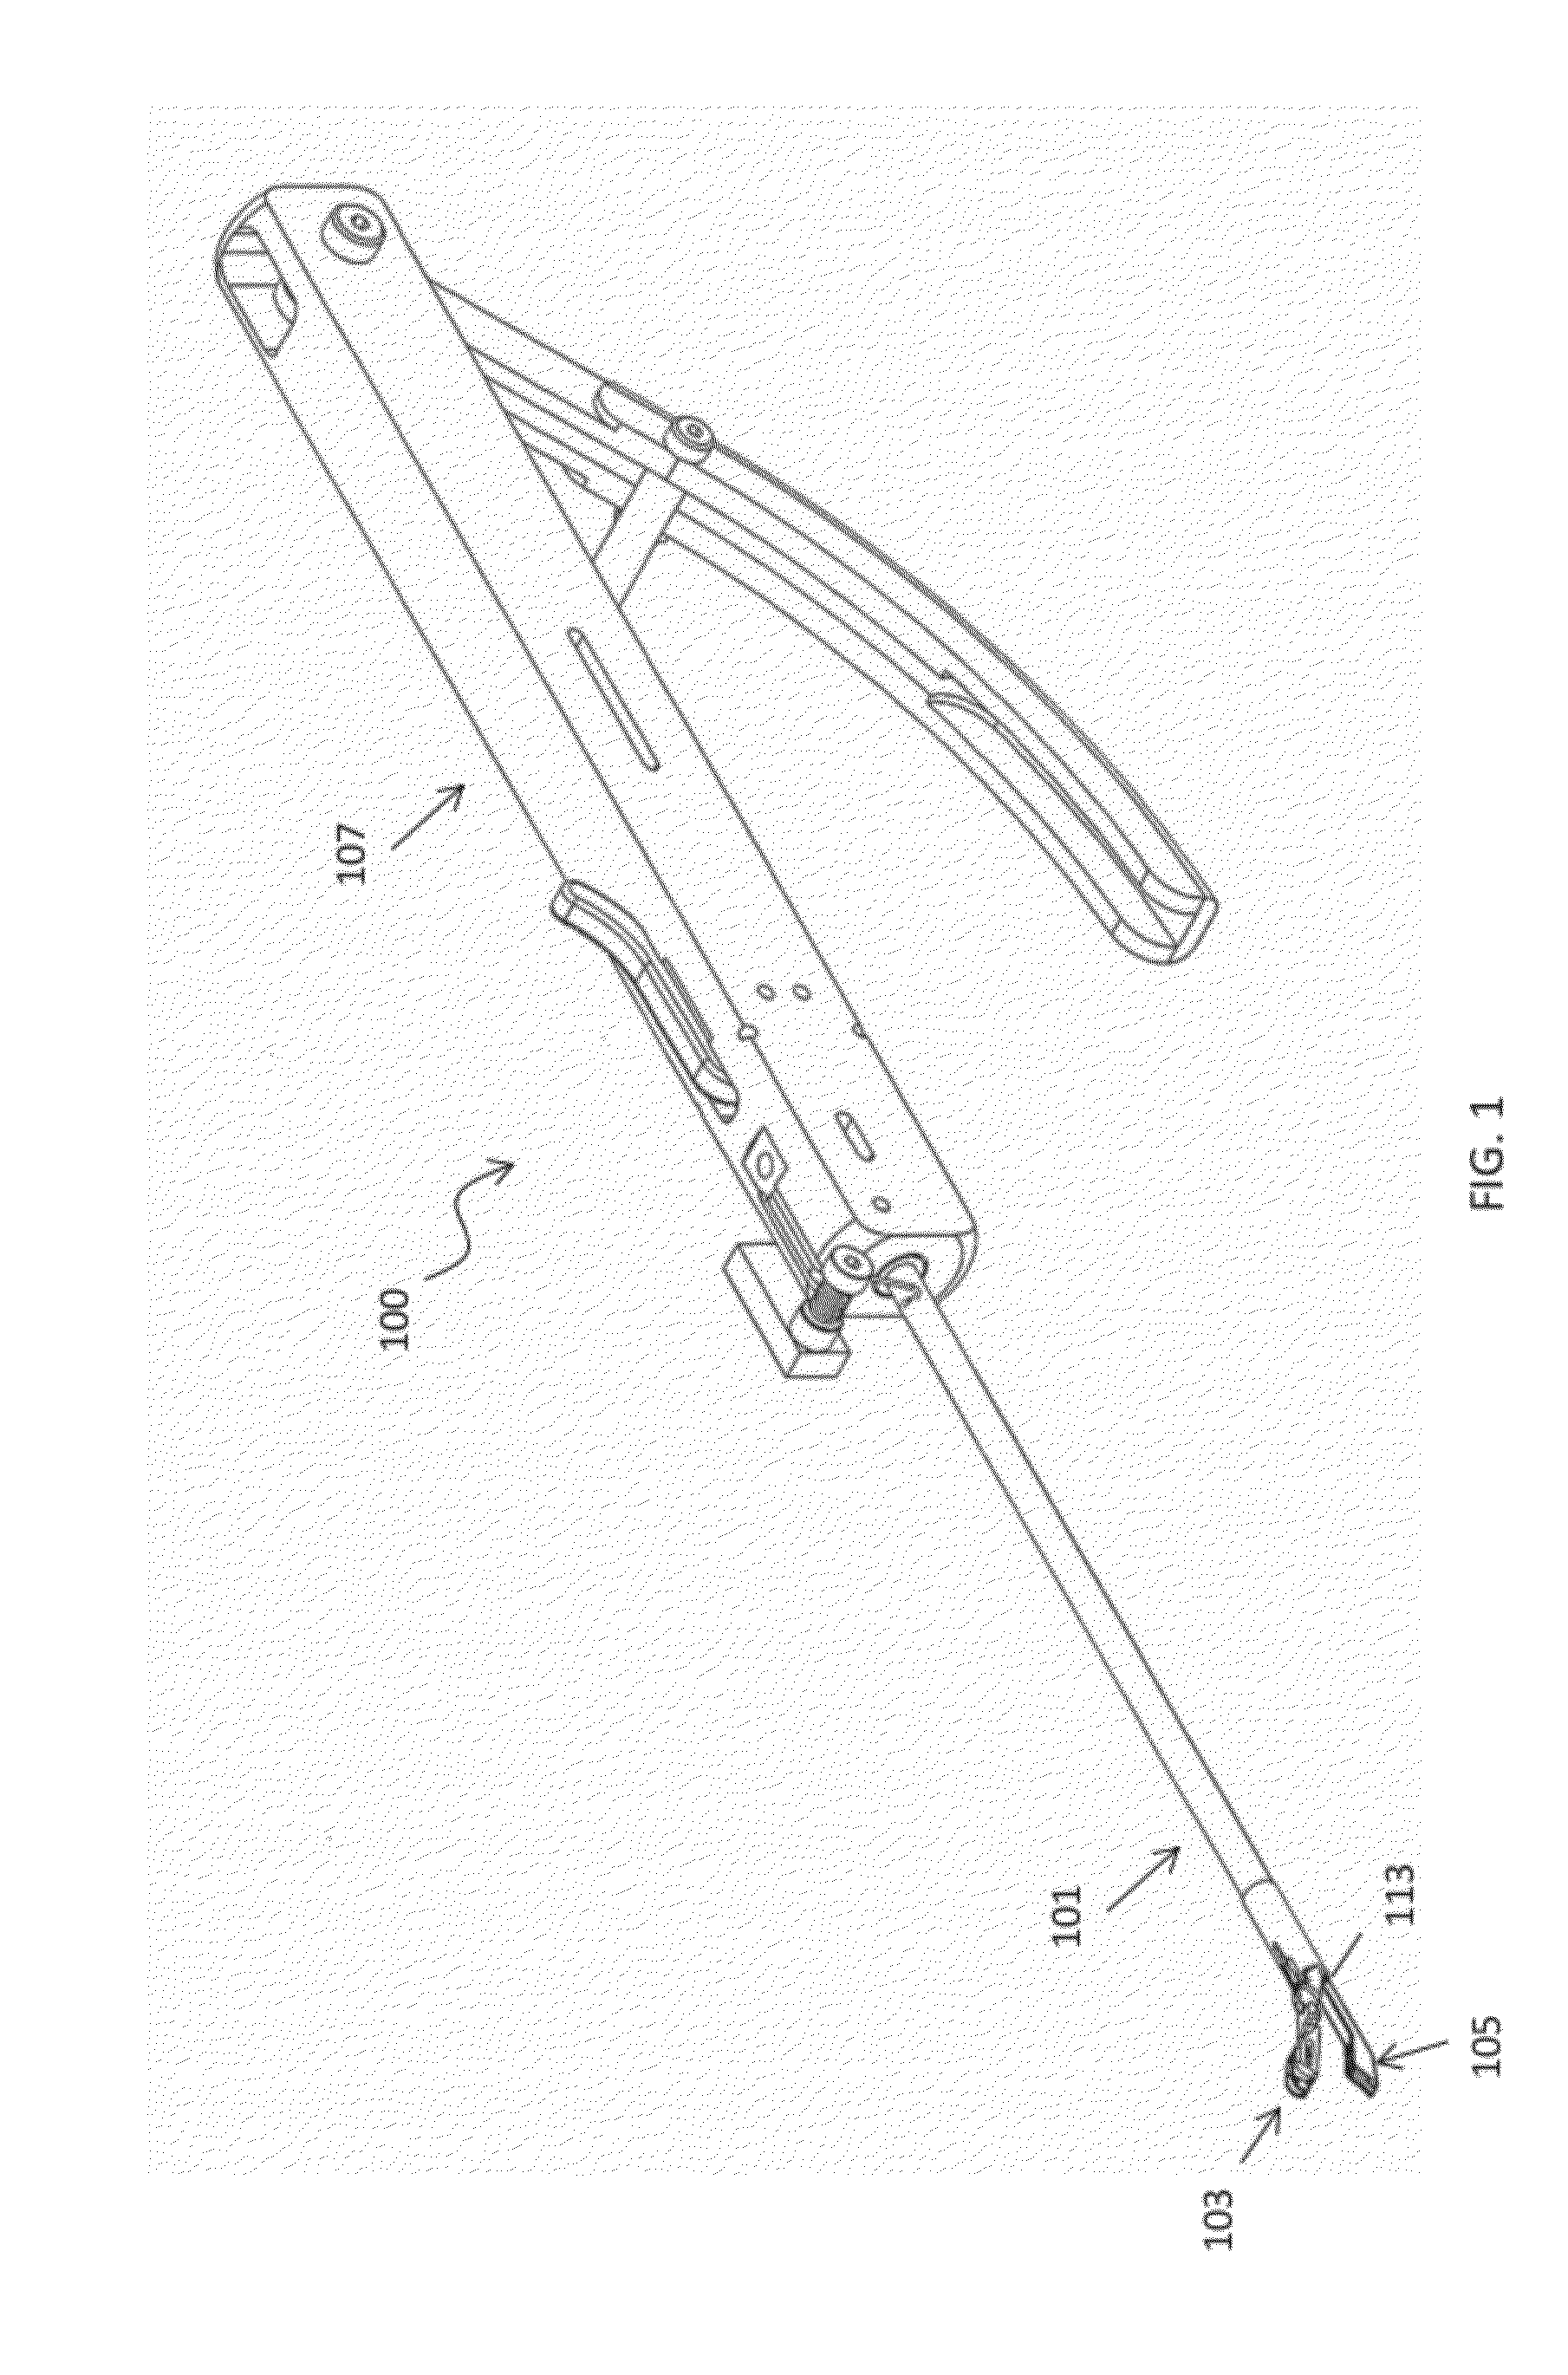 Suture passer devices and methods